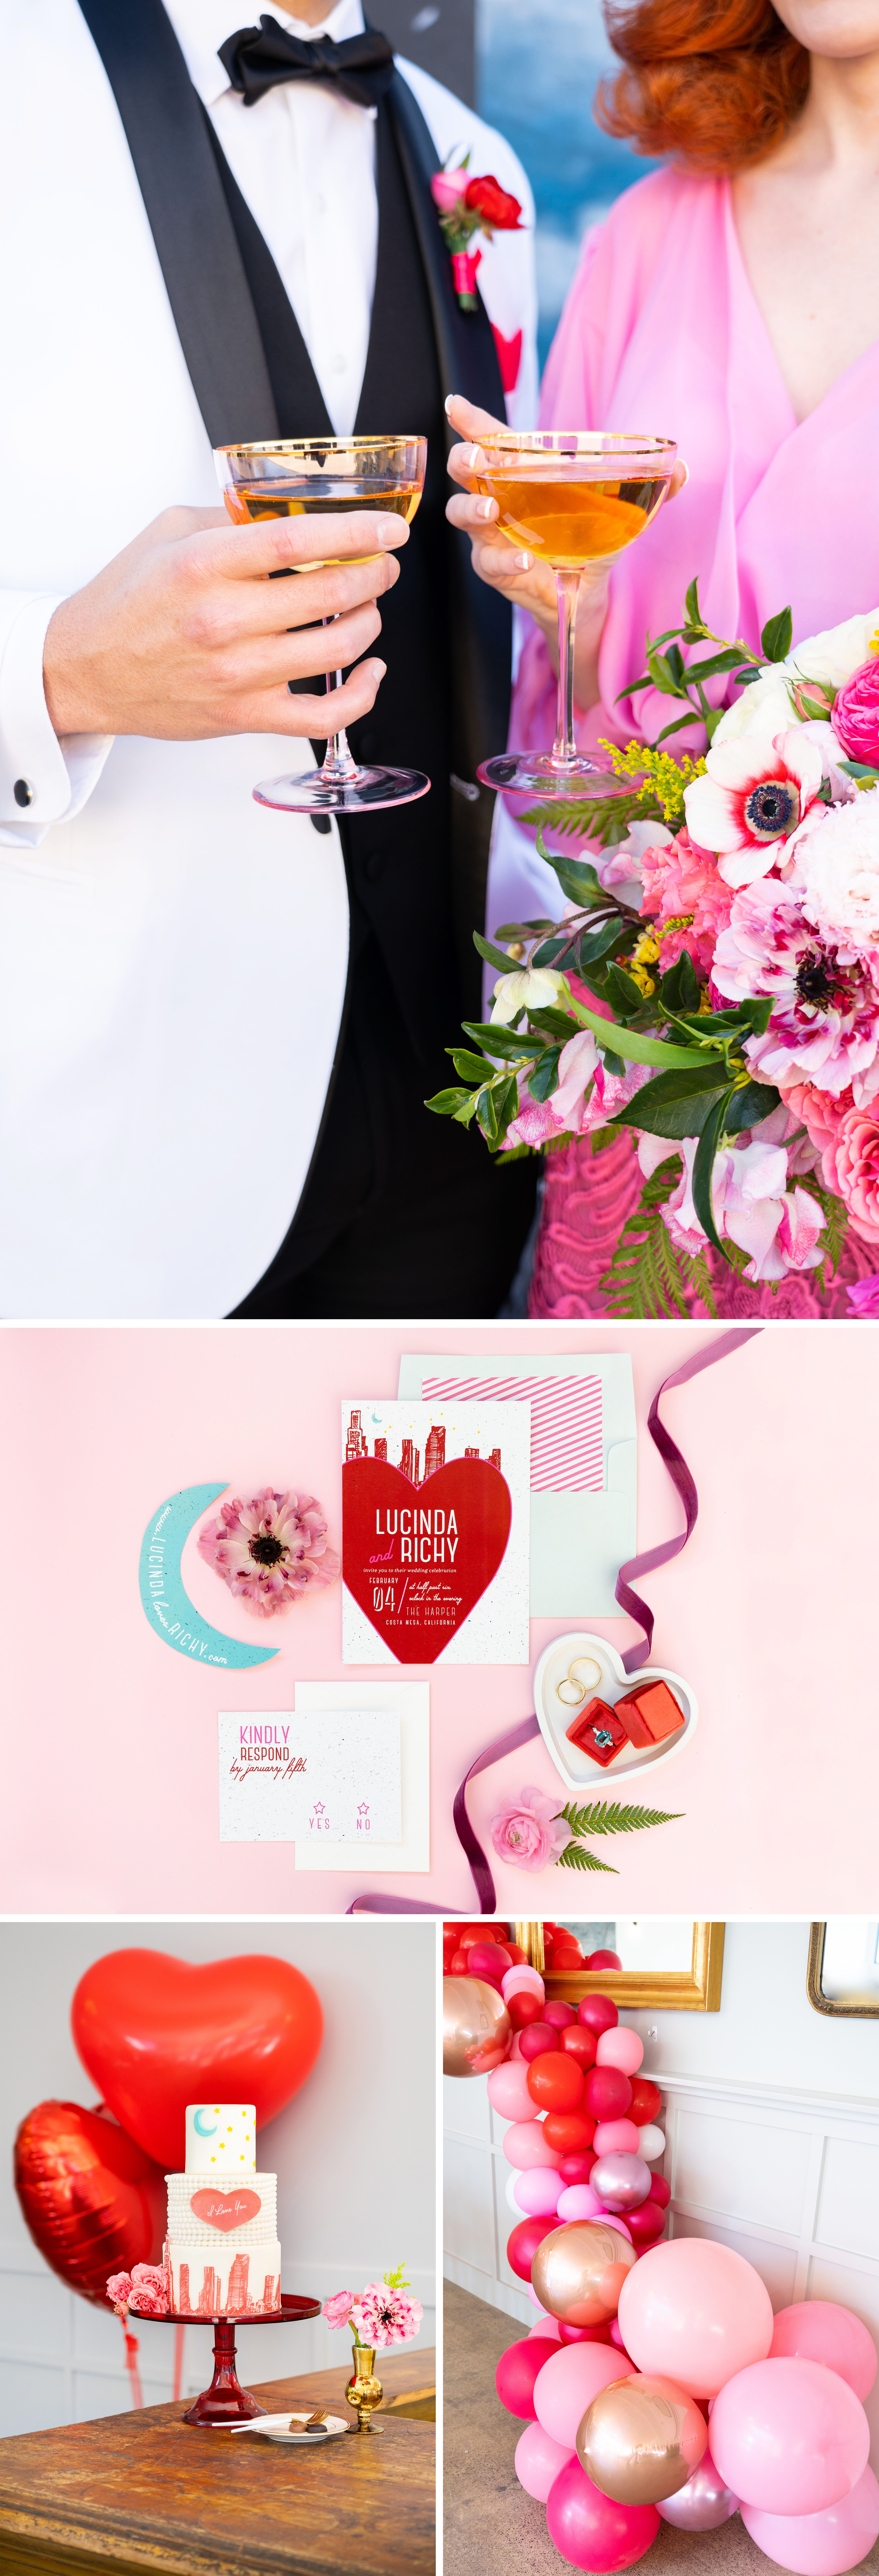 Colorful quirky details from our vintage Valentine's Day wedding featuring a balloon installation, pink flower bouquets, I Love Lucy inspired invitations and a retro cake.